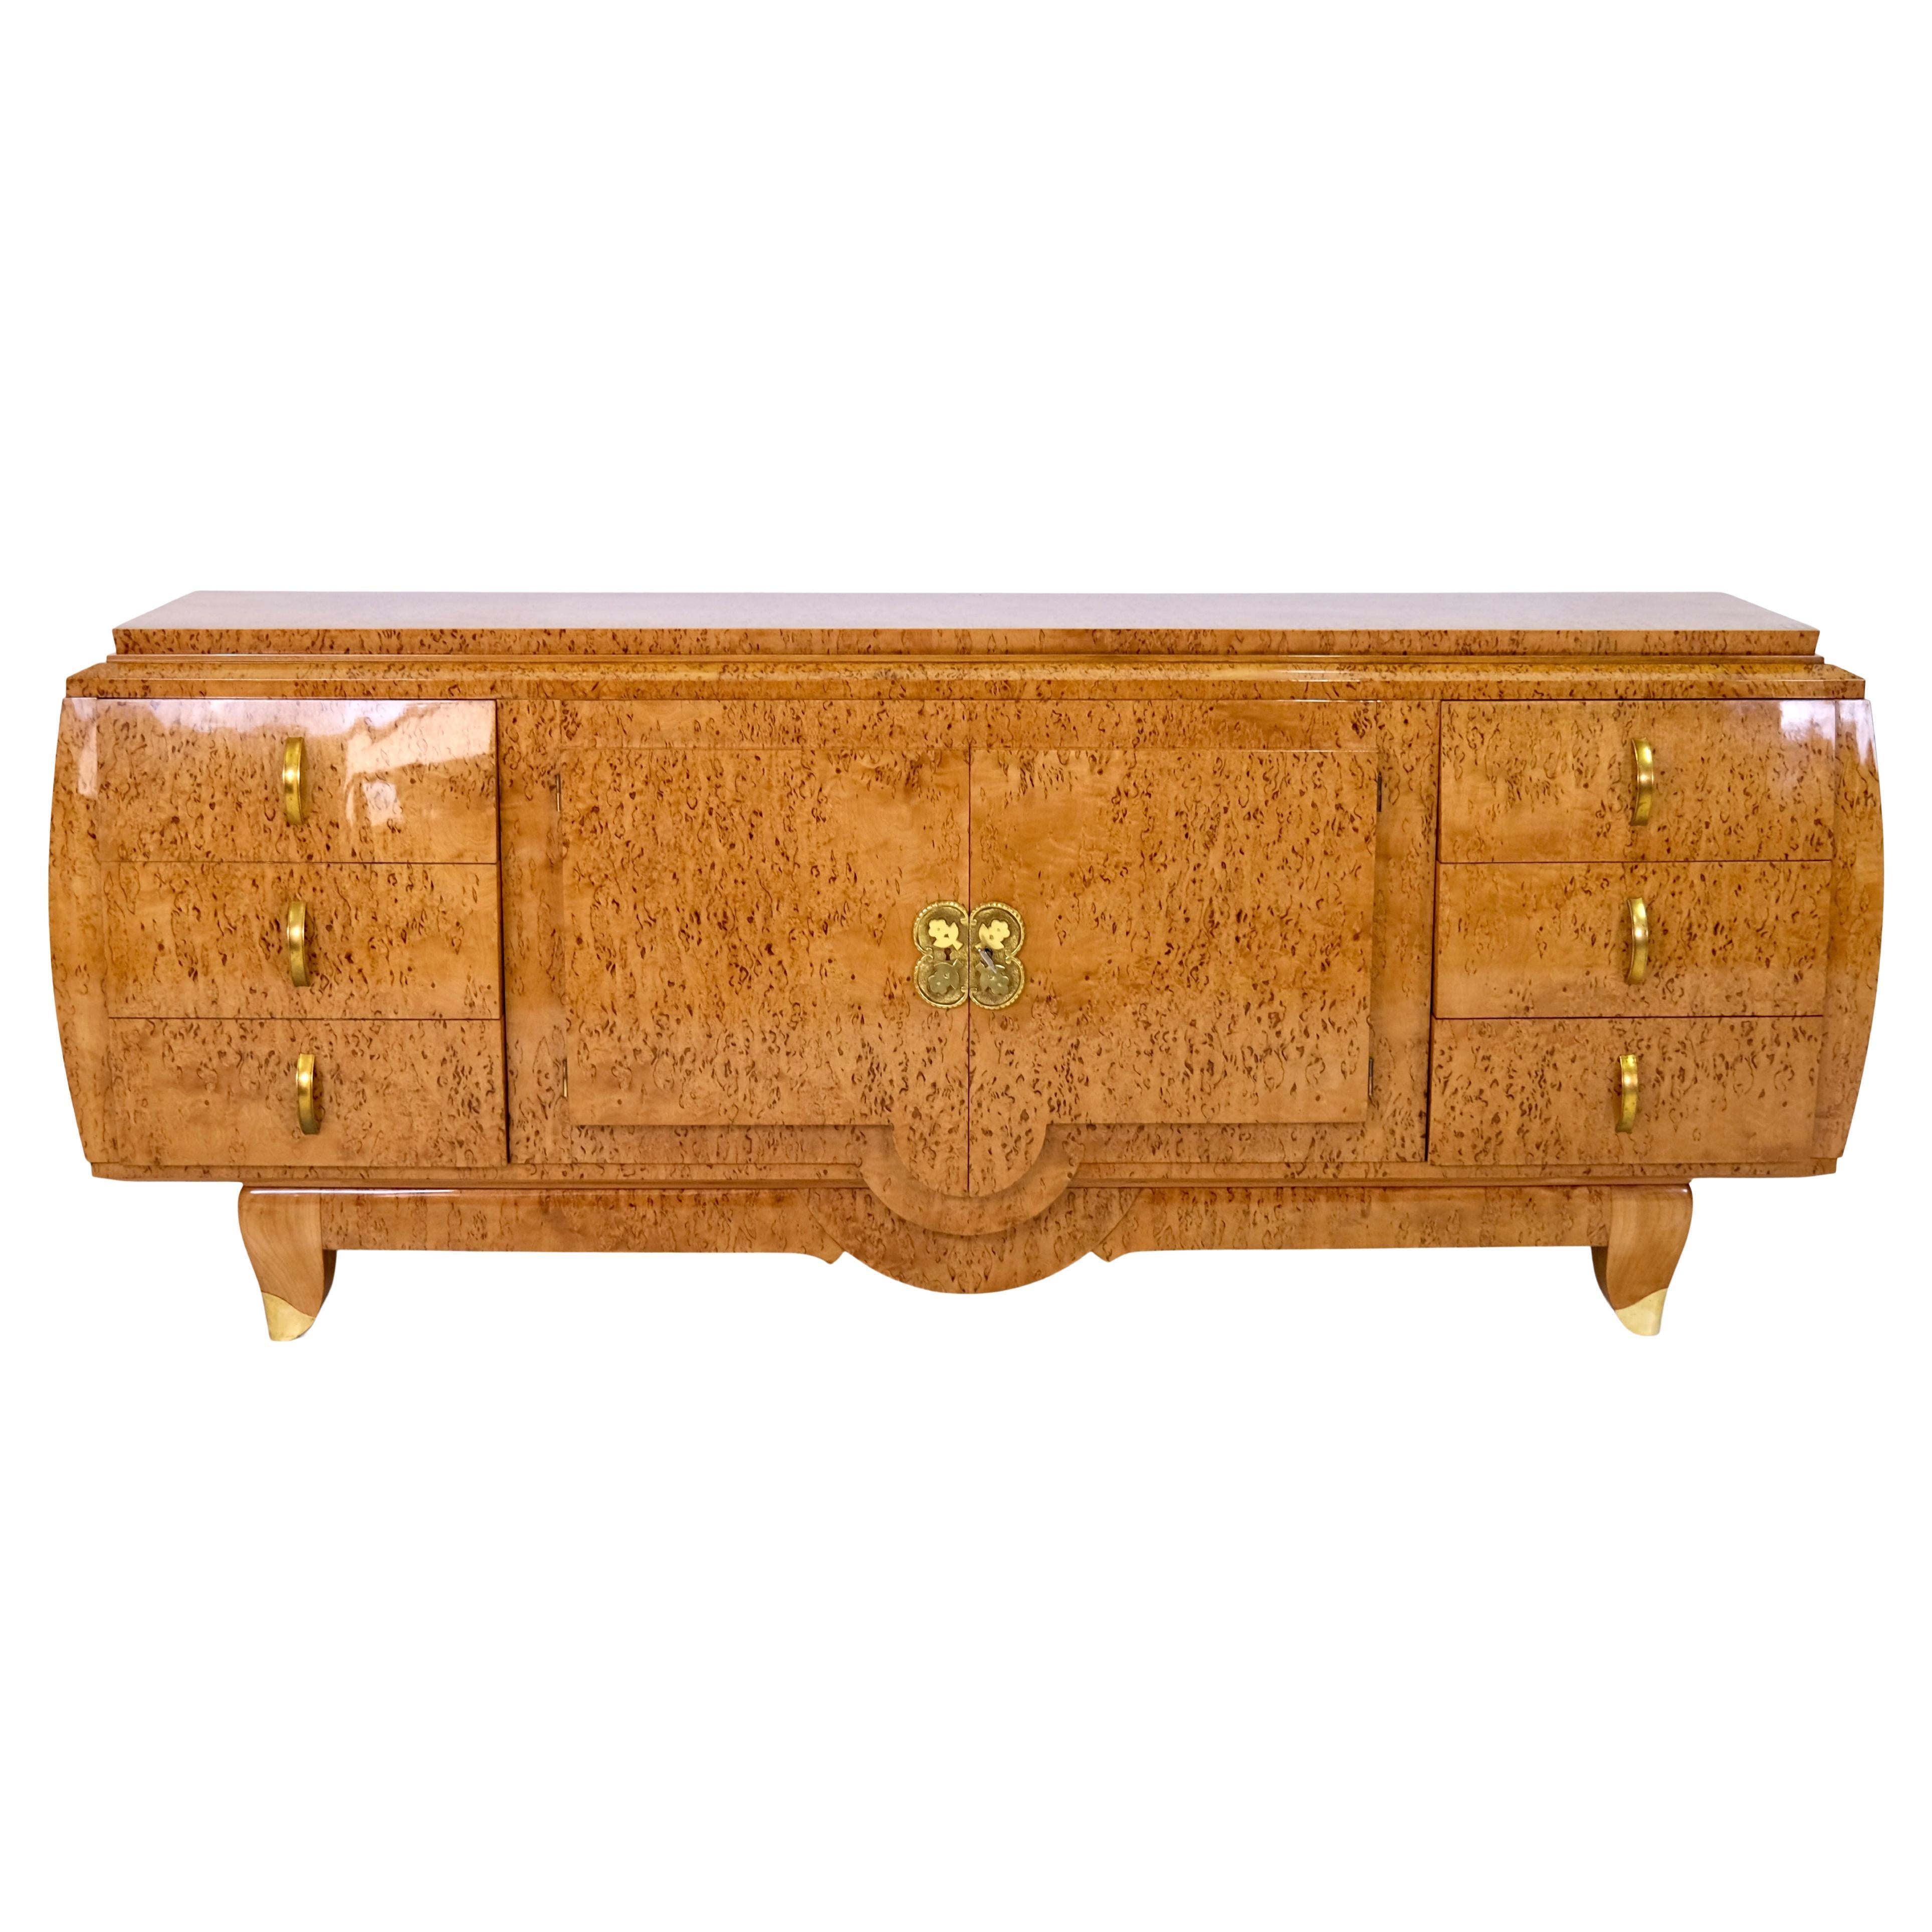 Curved hand polished Art Deco Sideboard in Birch Burl Wood with Brass Fittings For Sale